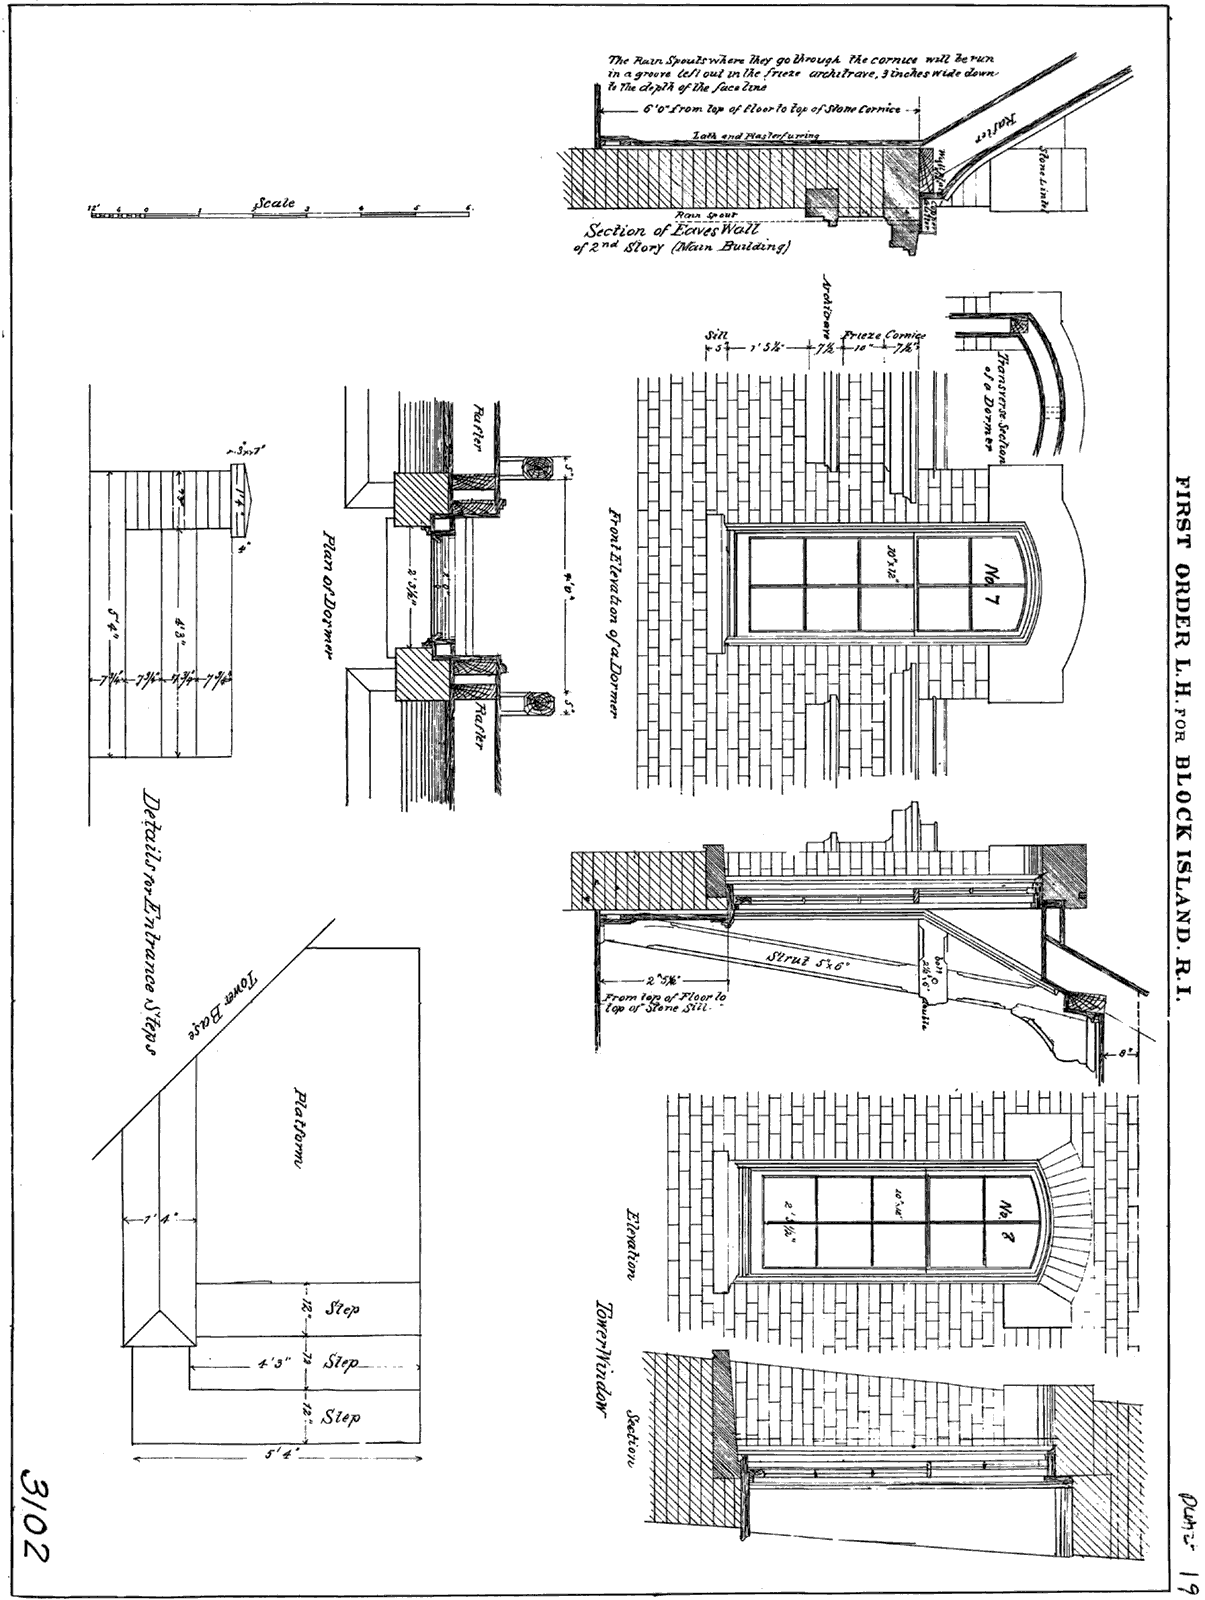 Plan for Block Island Southeast Lighthouse's entrance steps, dormer, and caves